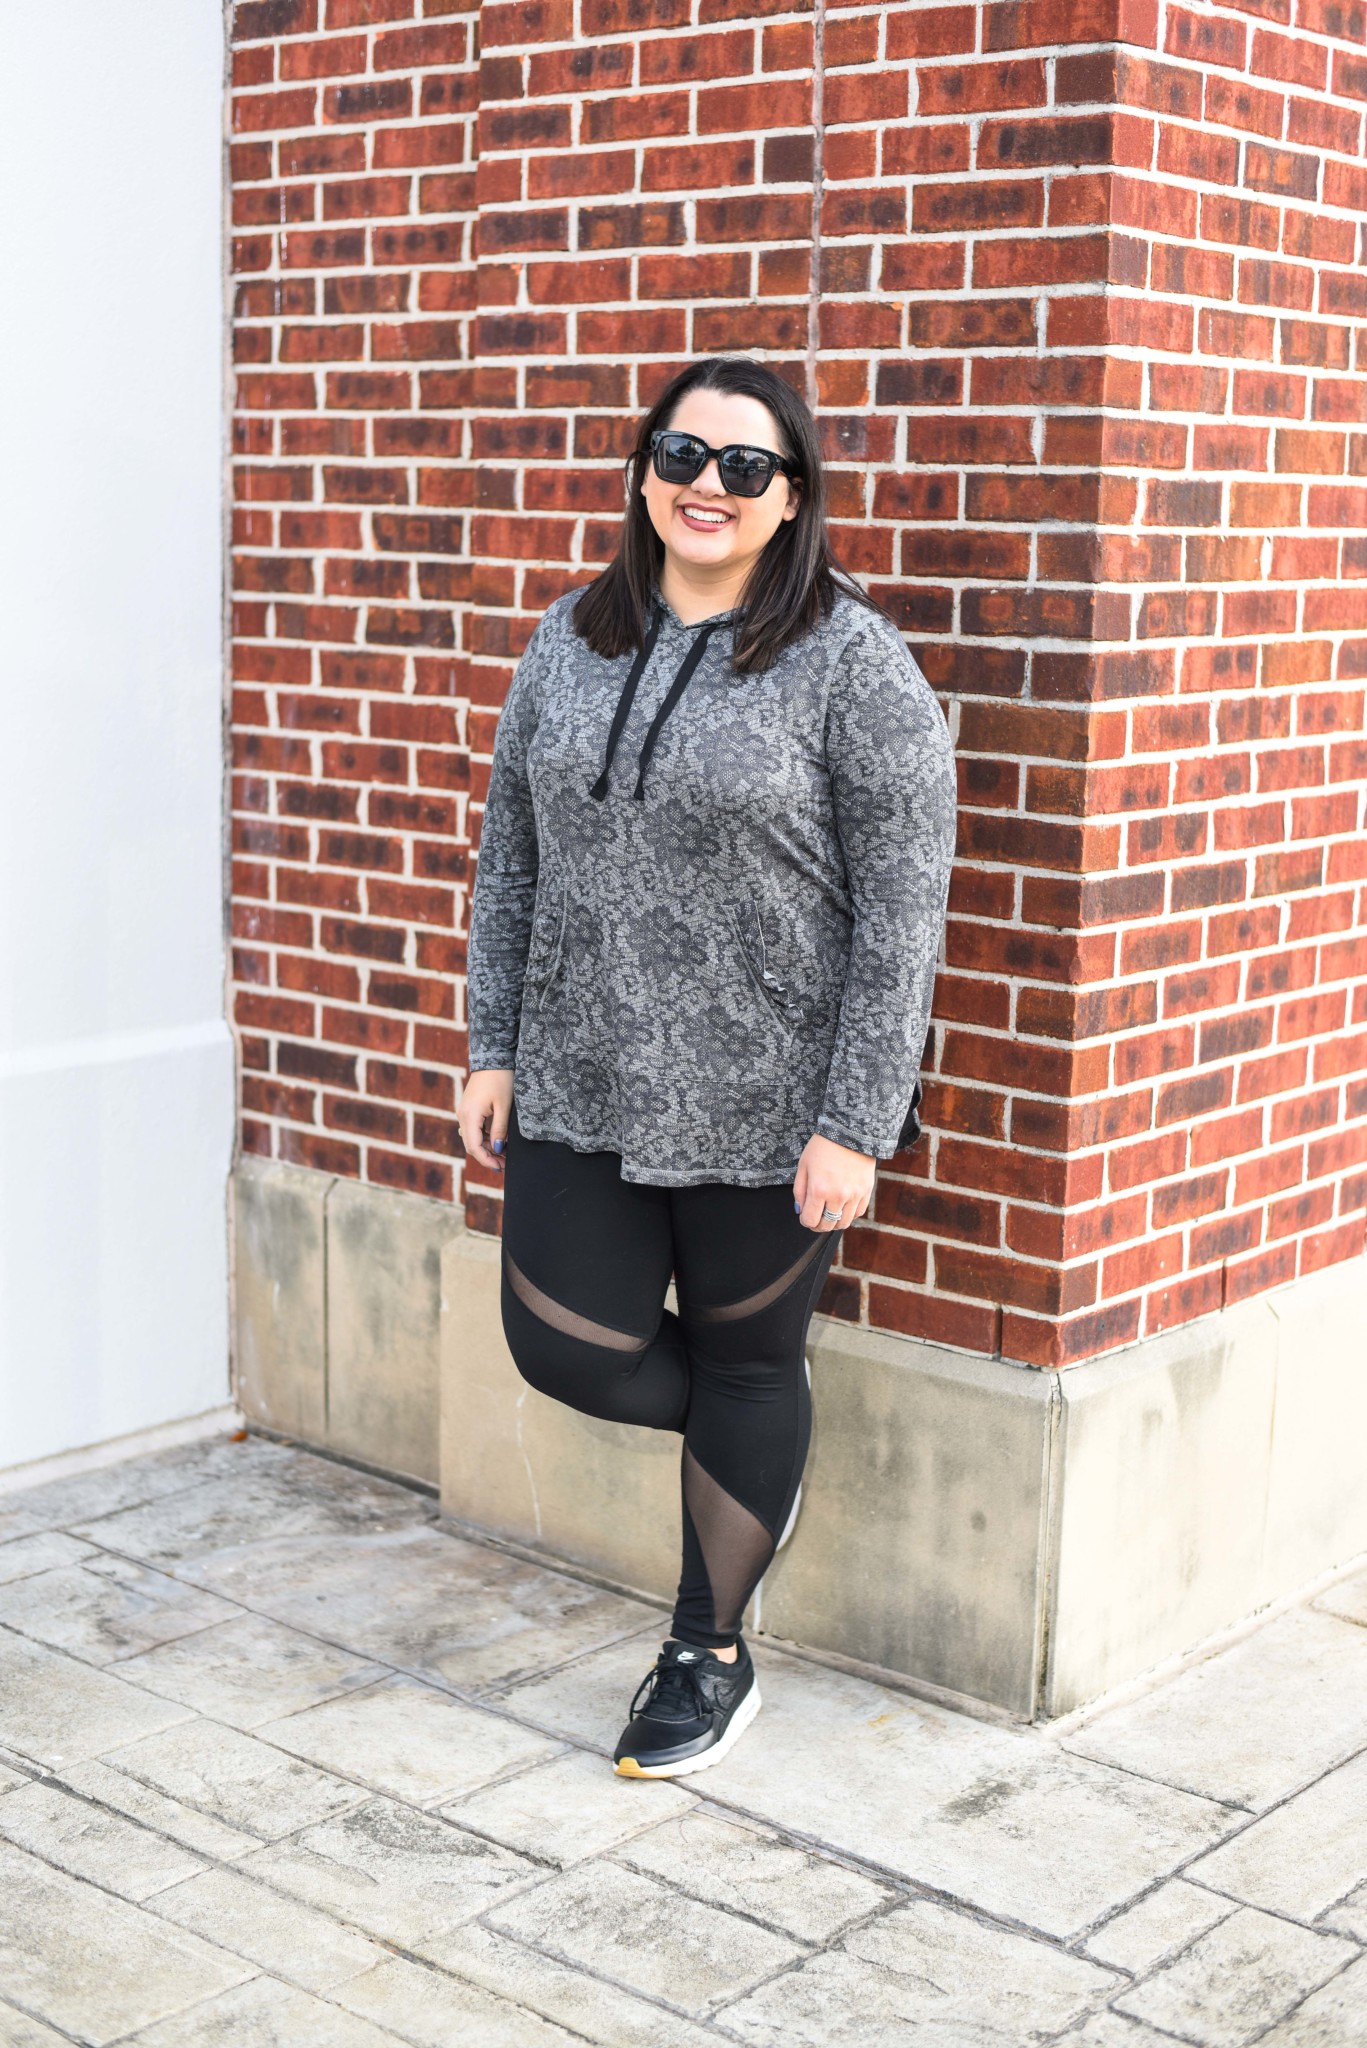 LIVI Activewear Hoodie with Ruffle Detail on Sale during Lane Bryant's Cyber Week Sale